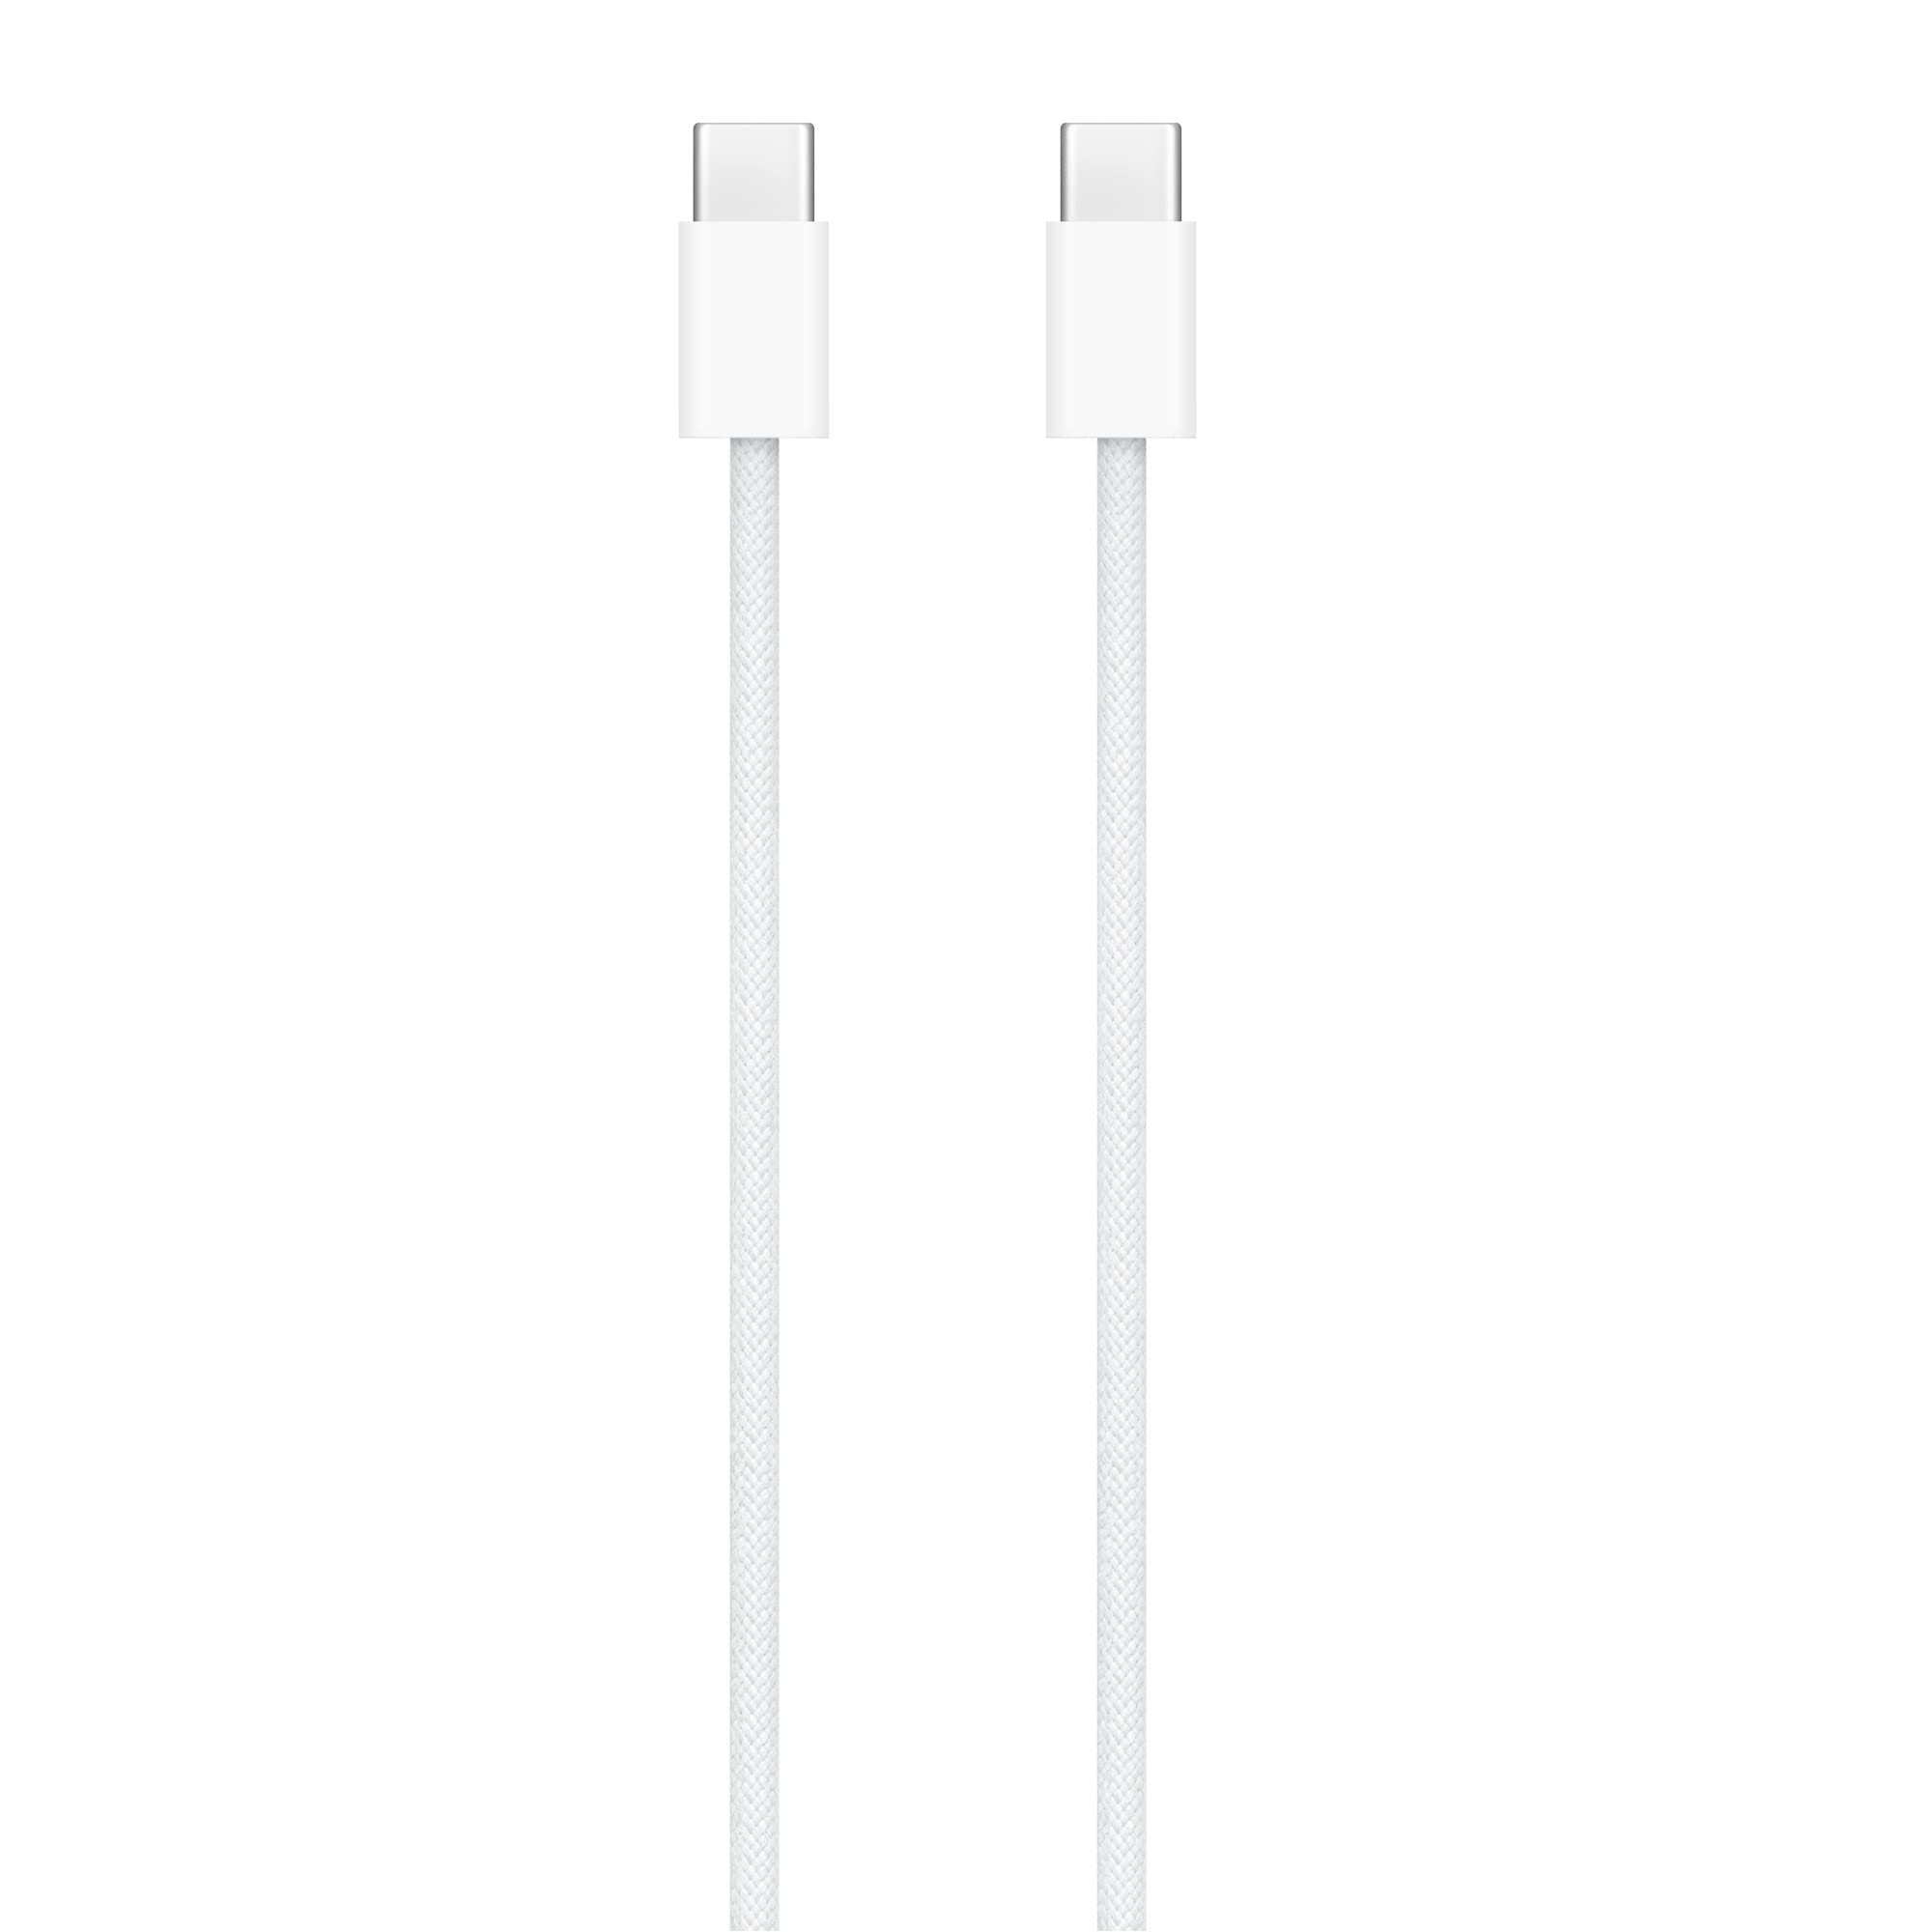 Apple USB-C Woven Charge Cable (1 m) ​​​​​​​